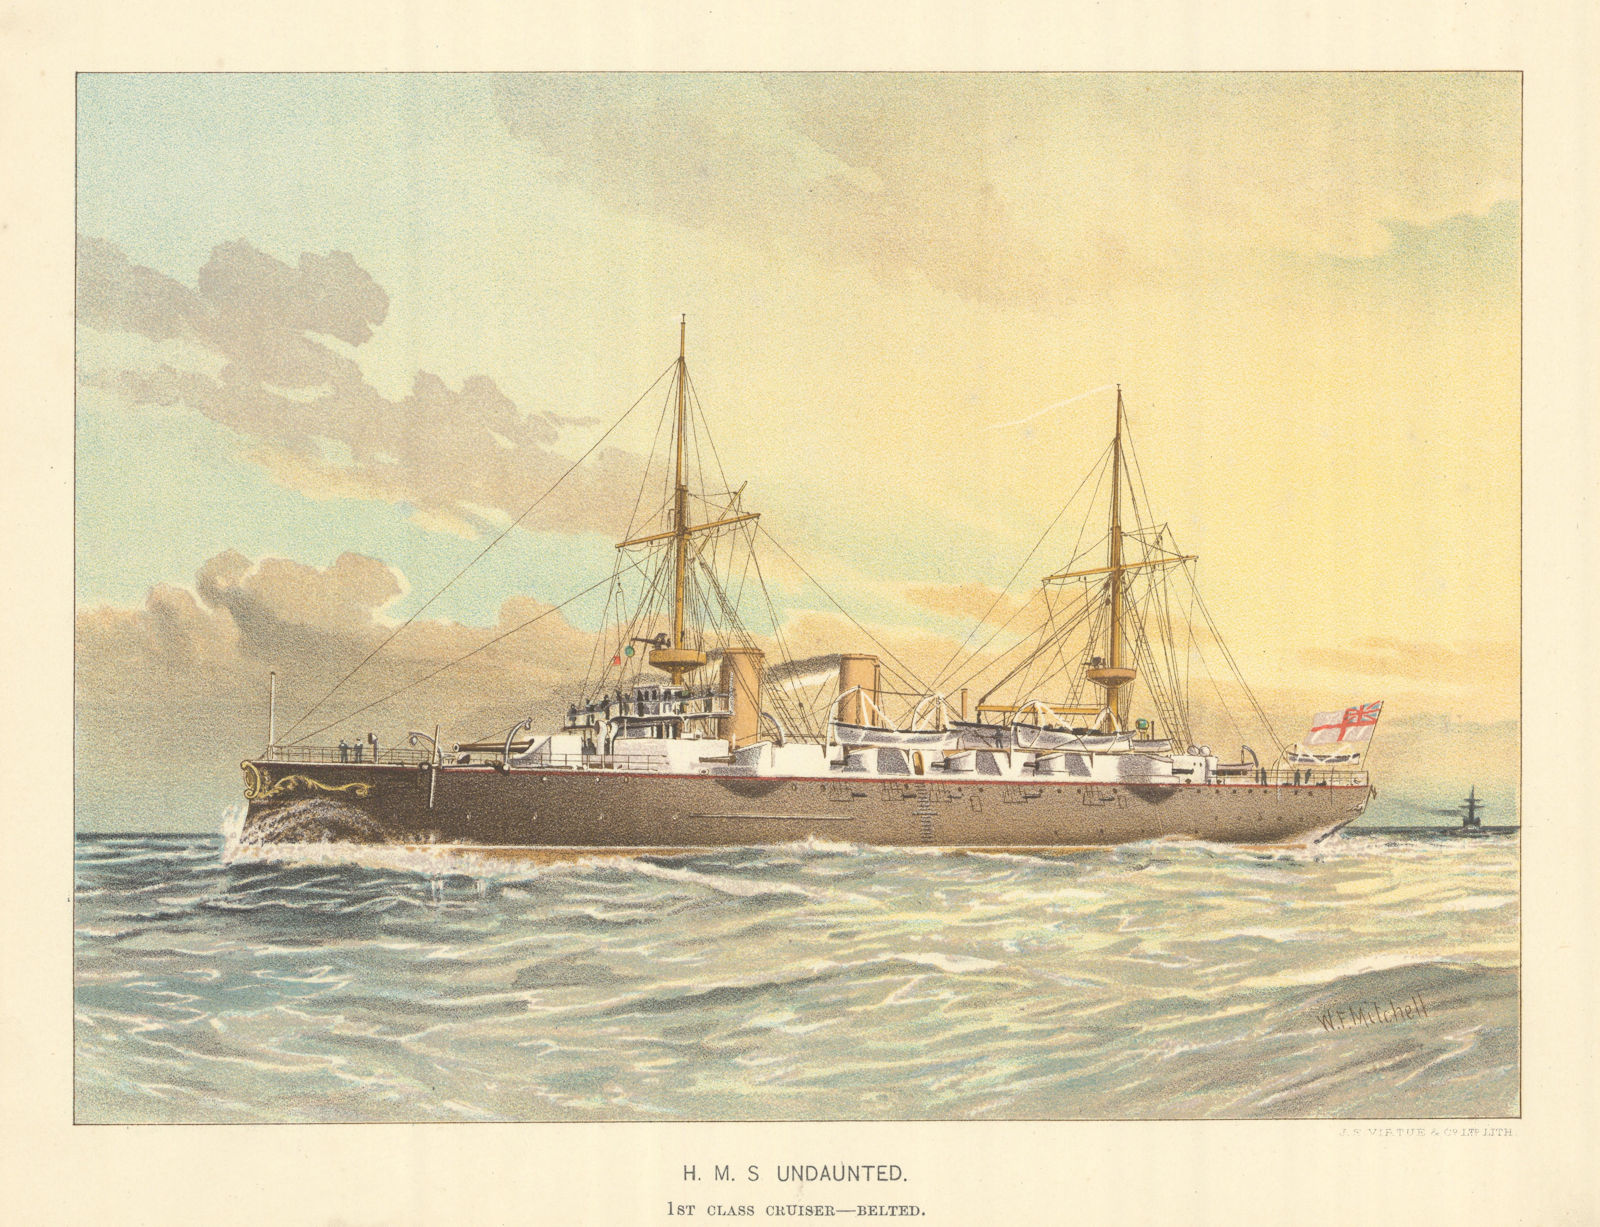 H.M.S. "Undaunted", 1st class cruiser (1886) by W.F. Mitchell. Royal Navy 1893